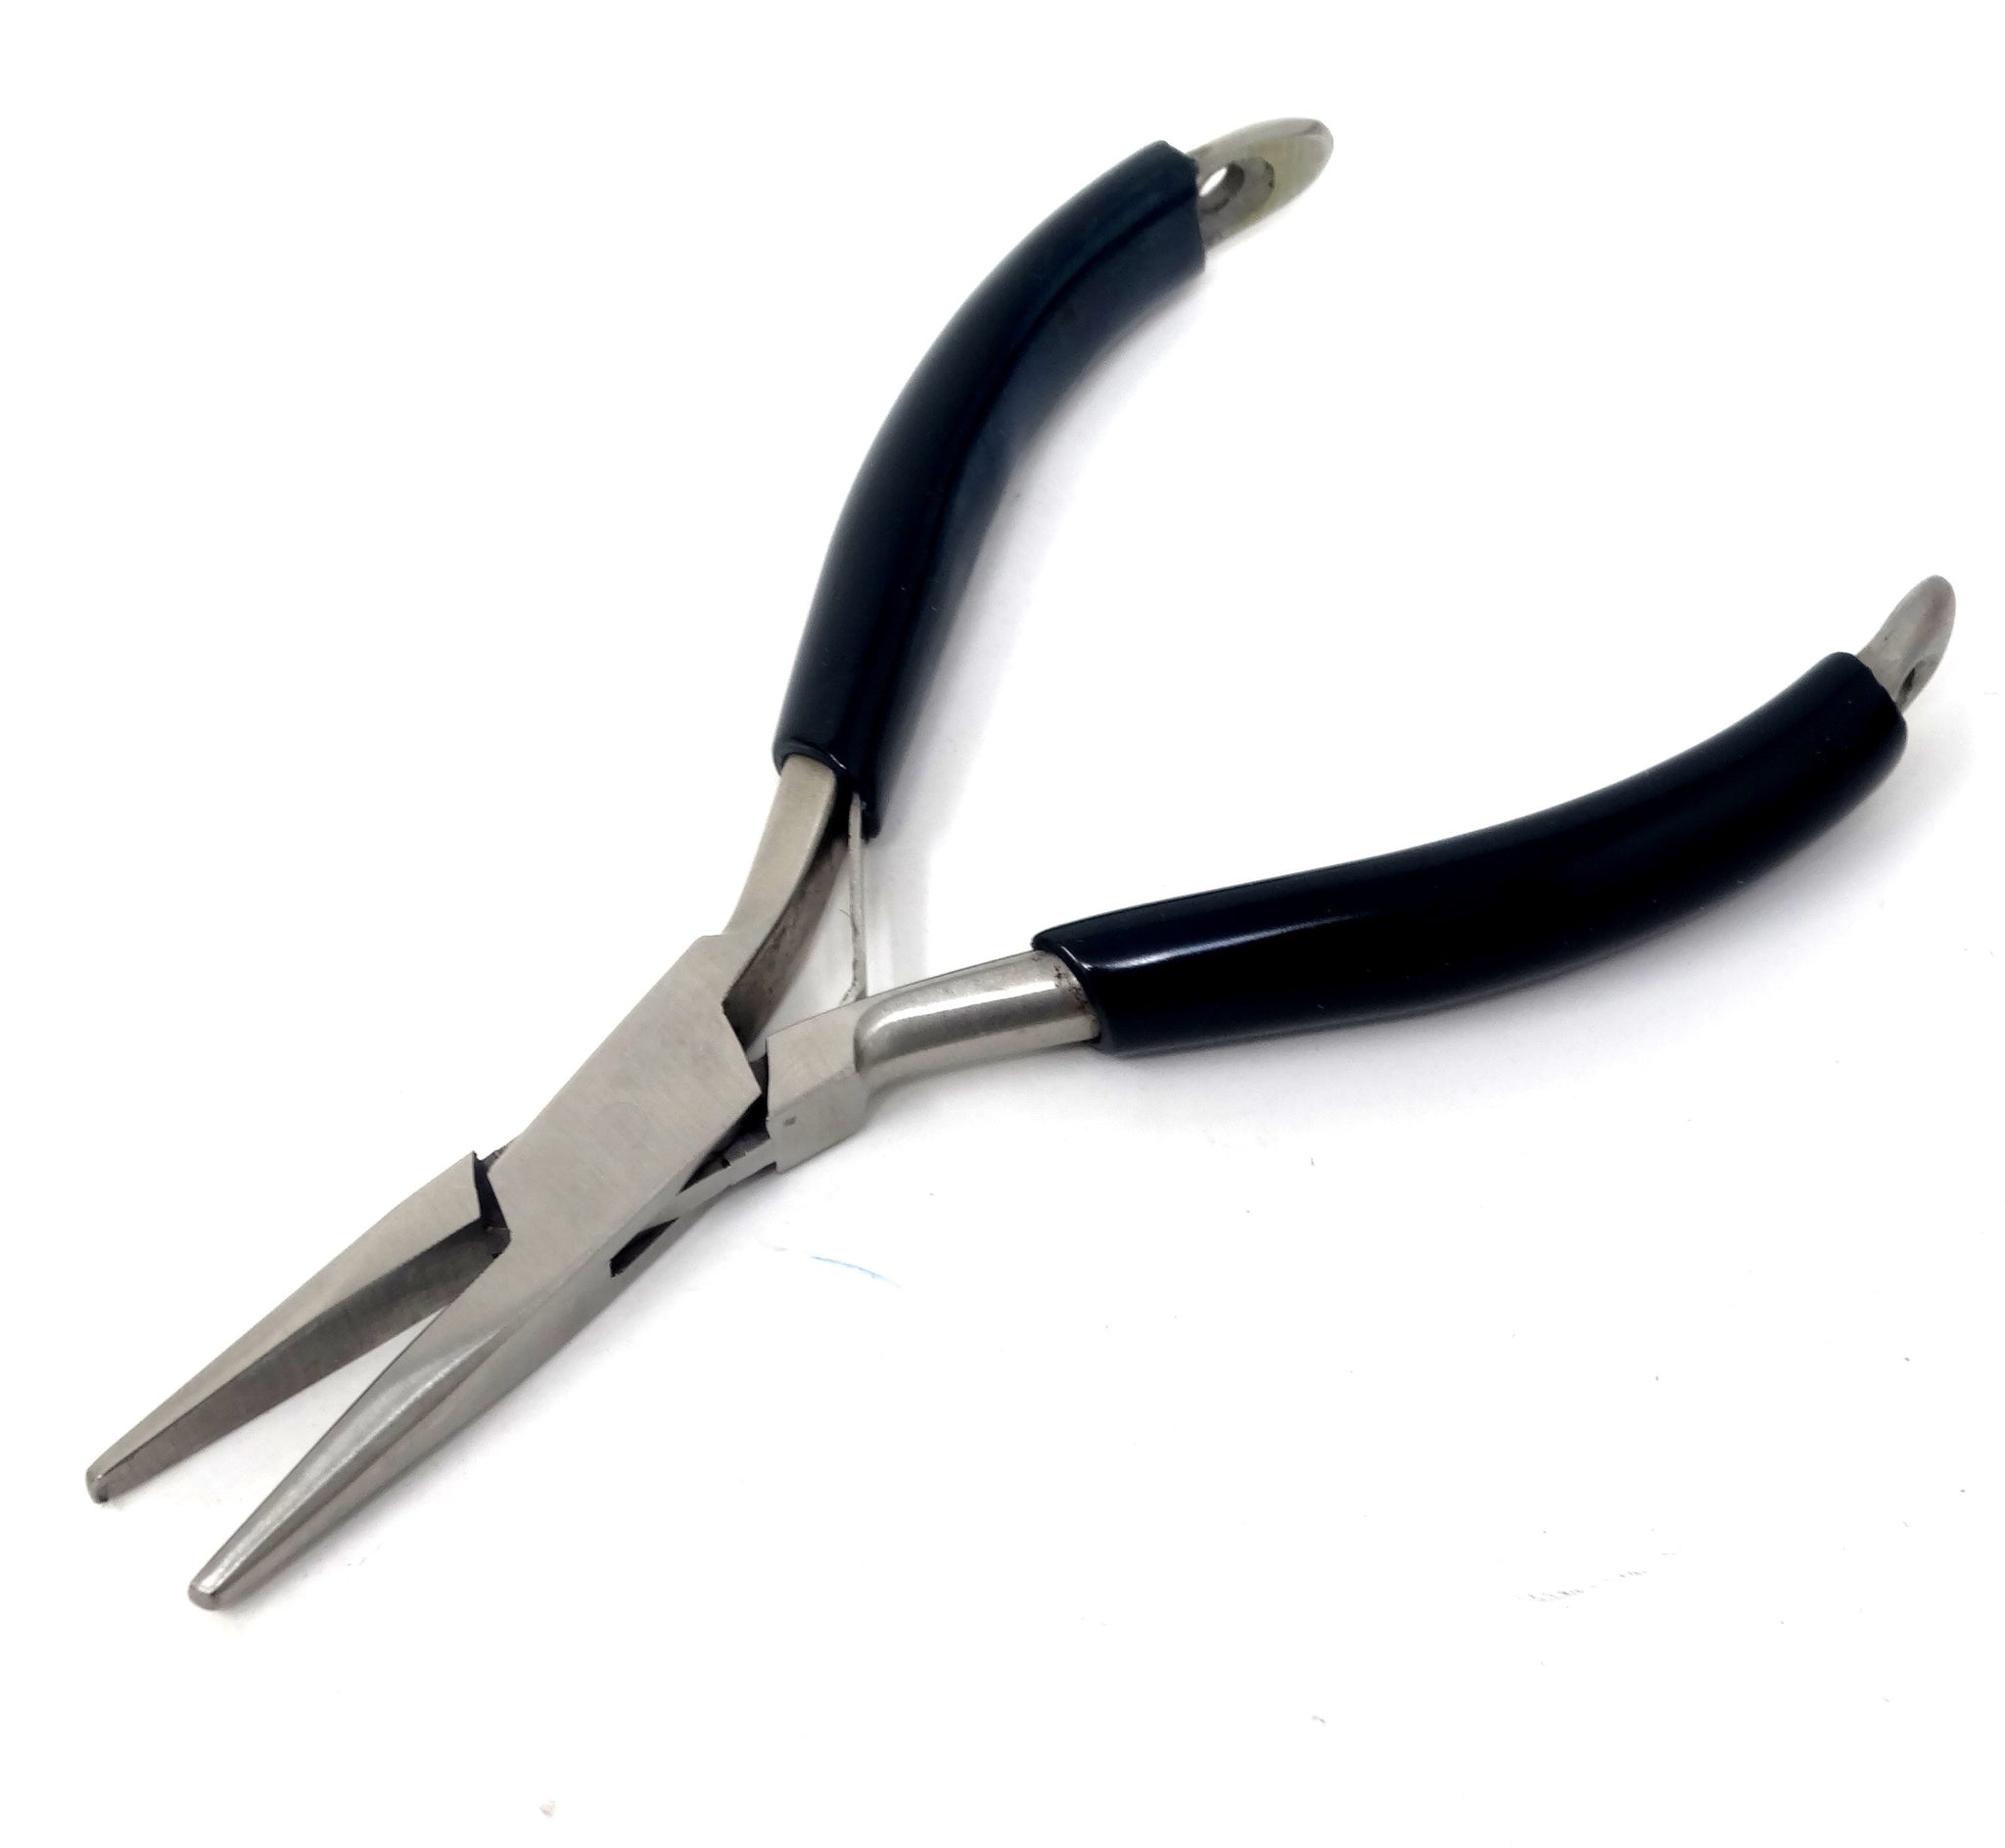 Flat Nose Professional Jewelry Pliers 4-1/2 inch W / V-Spring Smooth Flat Jaws PVC Handle Jewelry Making Repair Tool, Women's, Size: Small, Black